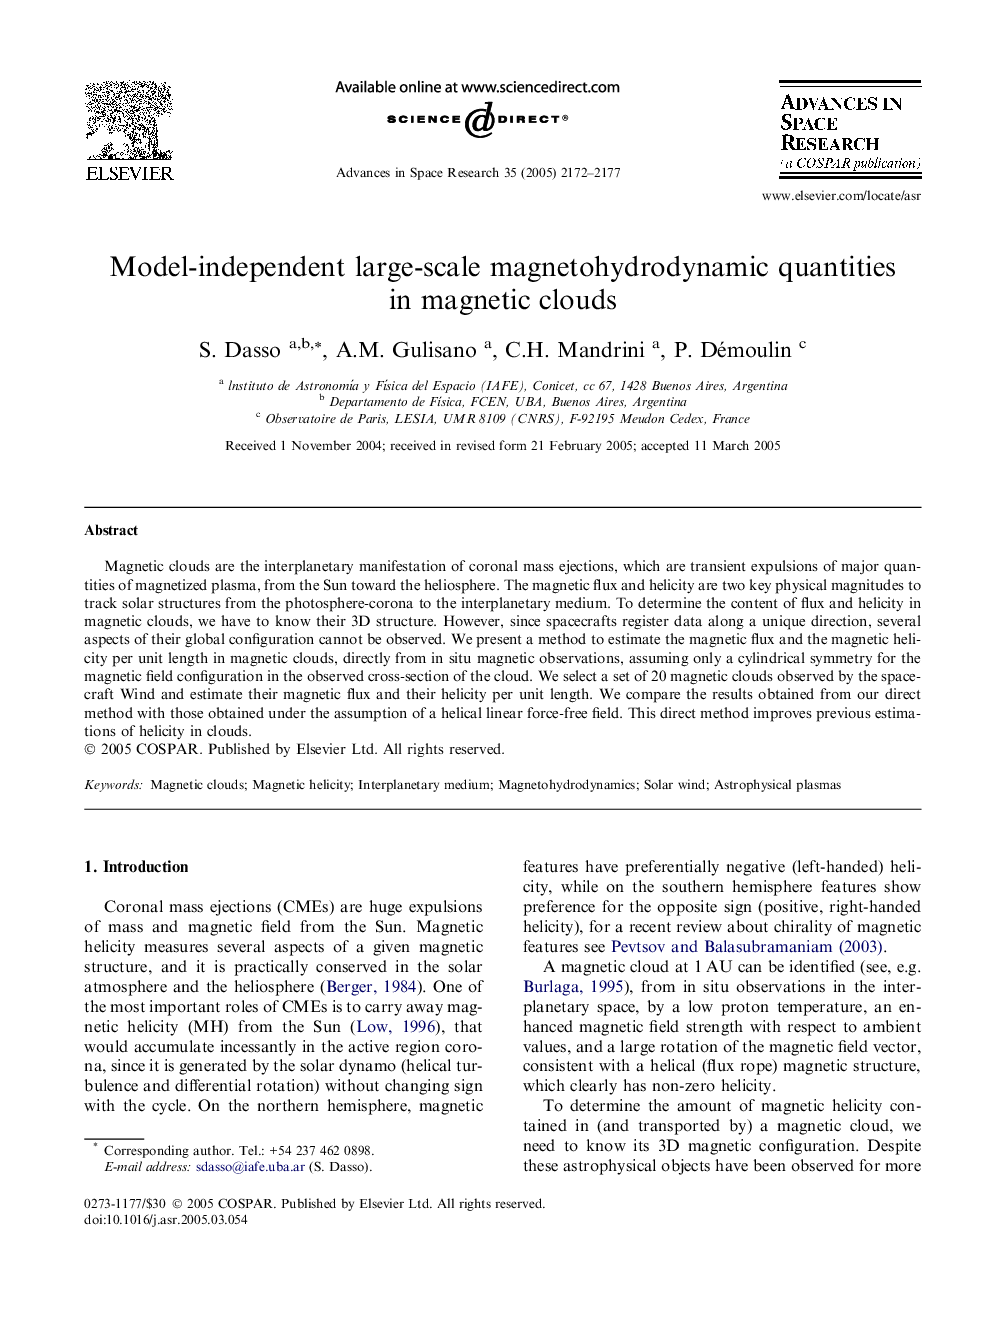 Model-independent large-scale magnetohydrodynamic quantities in magnetic clouds